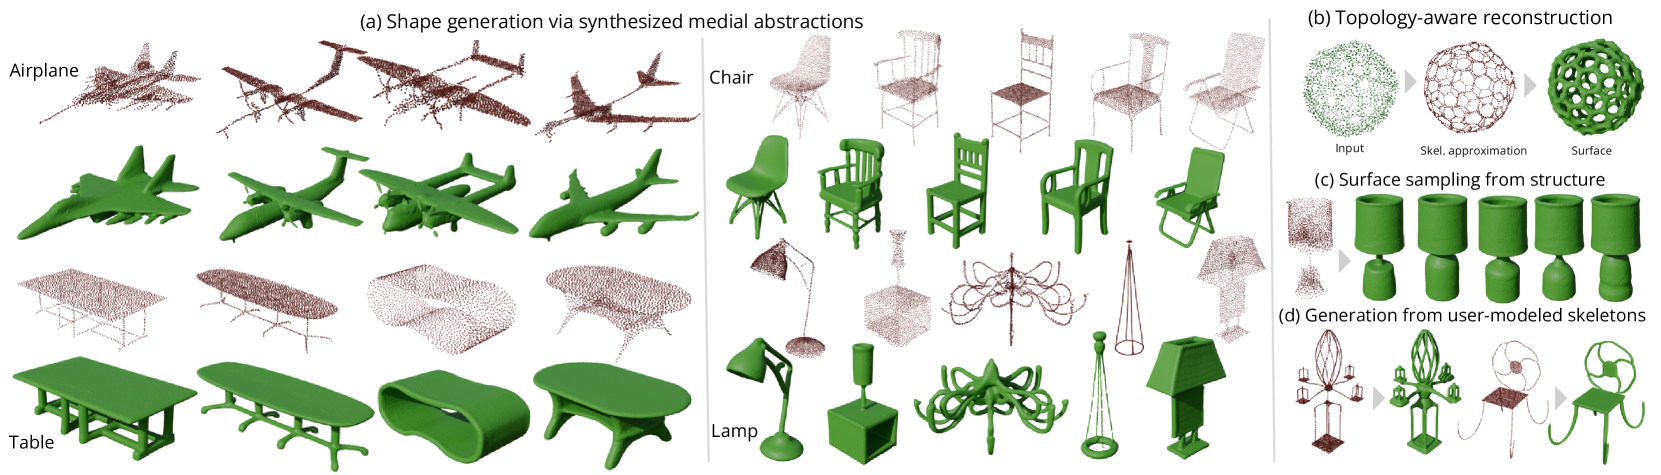 GEM3D: GEnerative Medial Abstractions for 3D Shape Synthesis